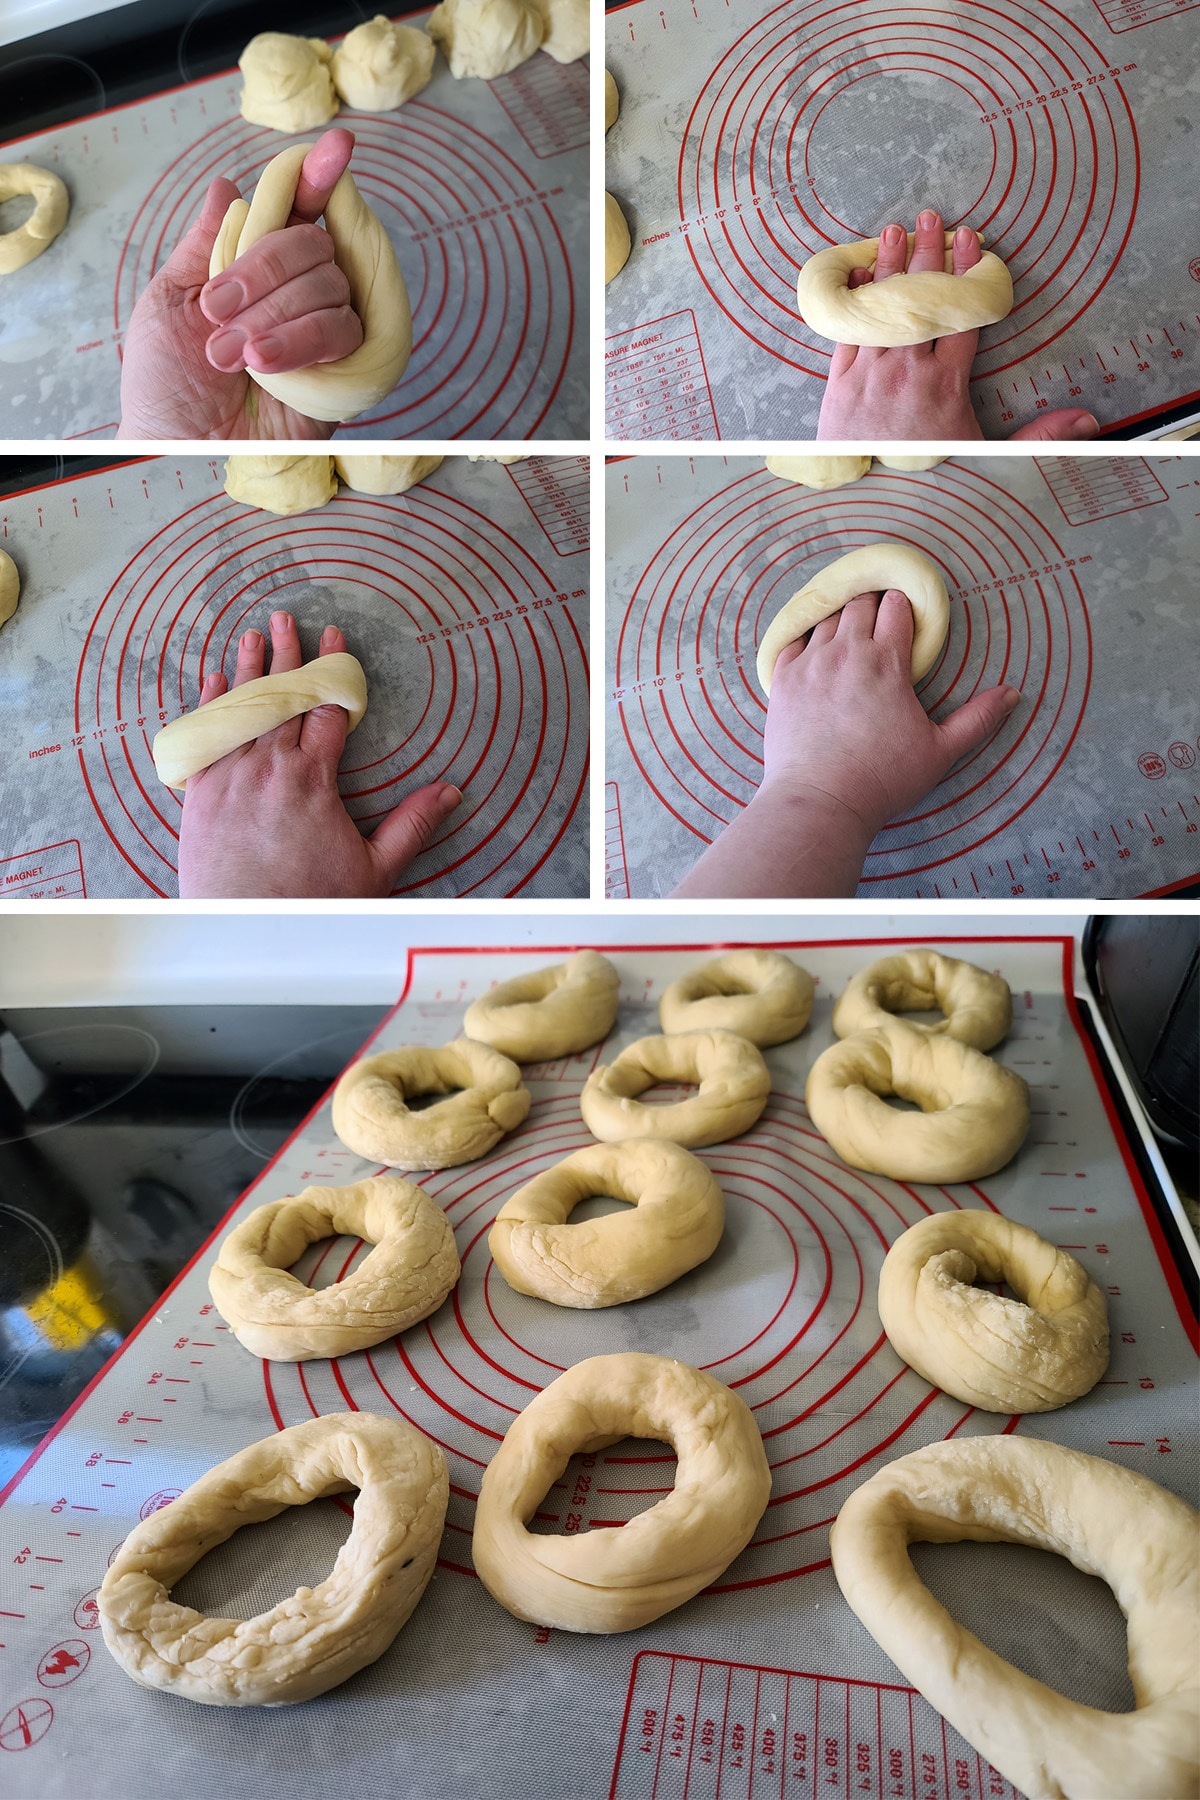 A 5 part image showing a snake of dough being joined into a ring and rolled.